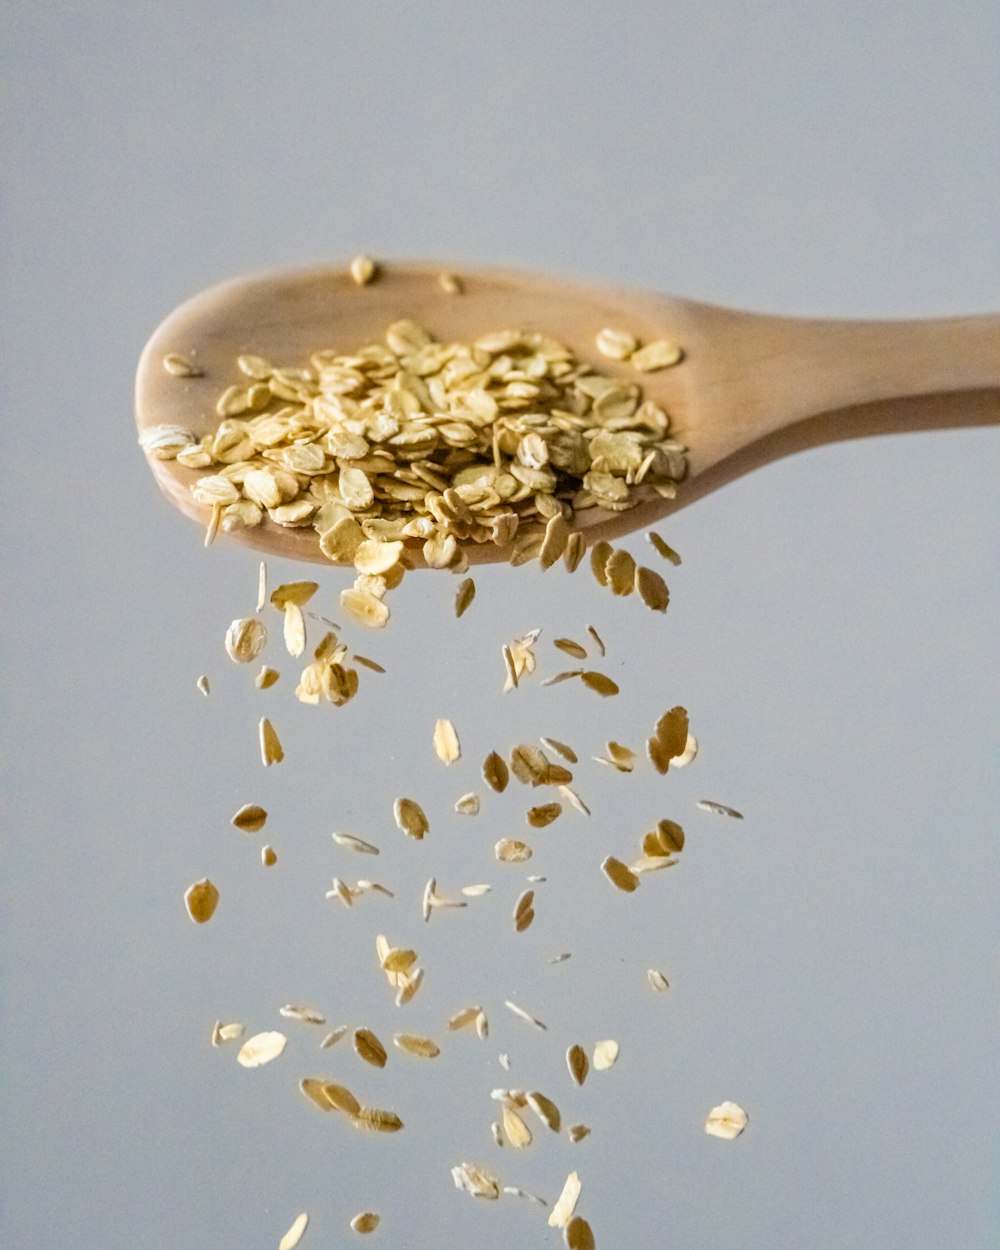 a wooden spoon filled with gold flakes